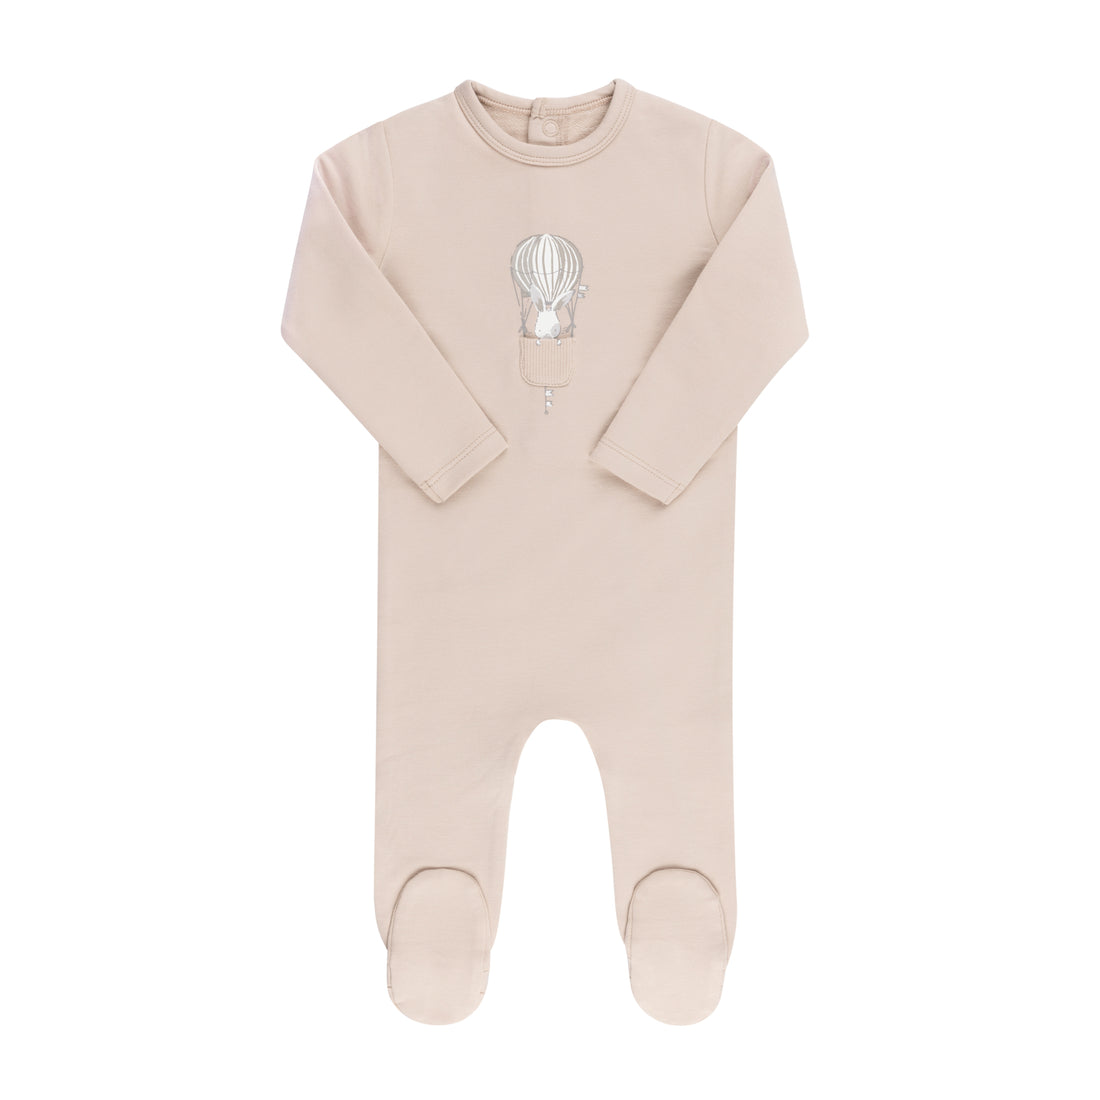 Ely`s & Co Hot Air Balloon Footie - Taupe Grey